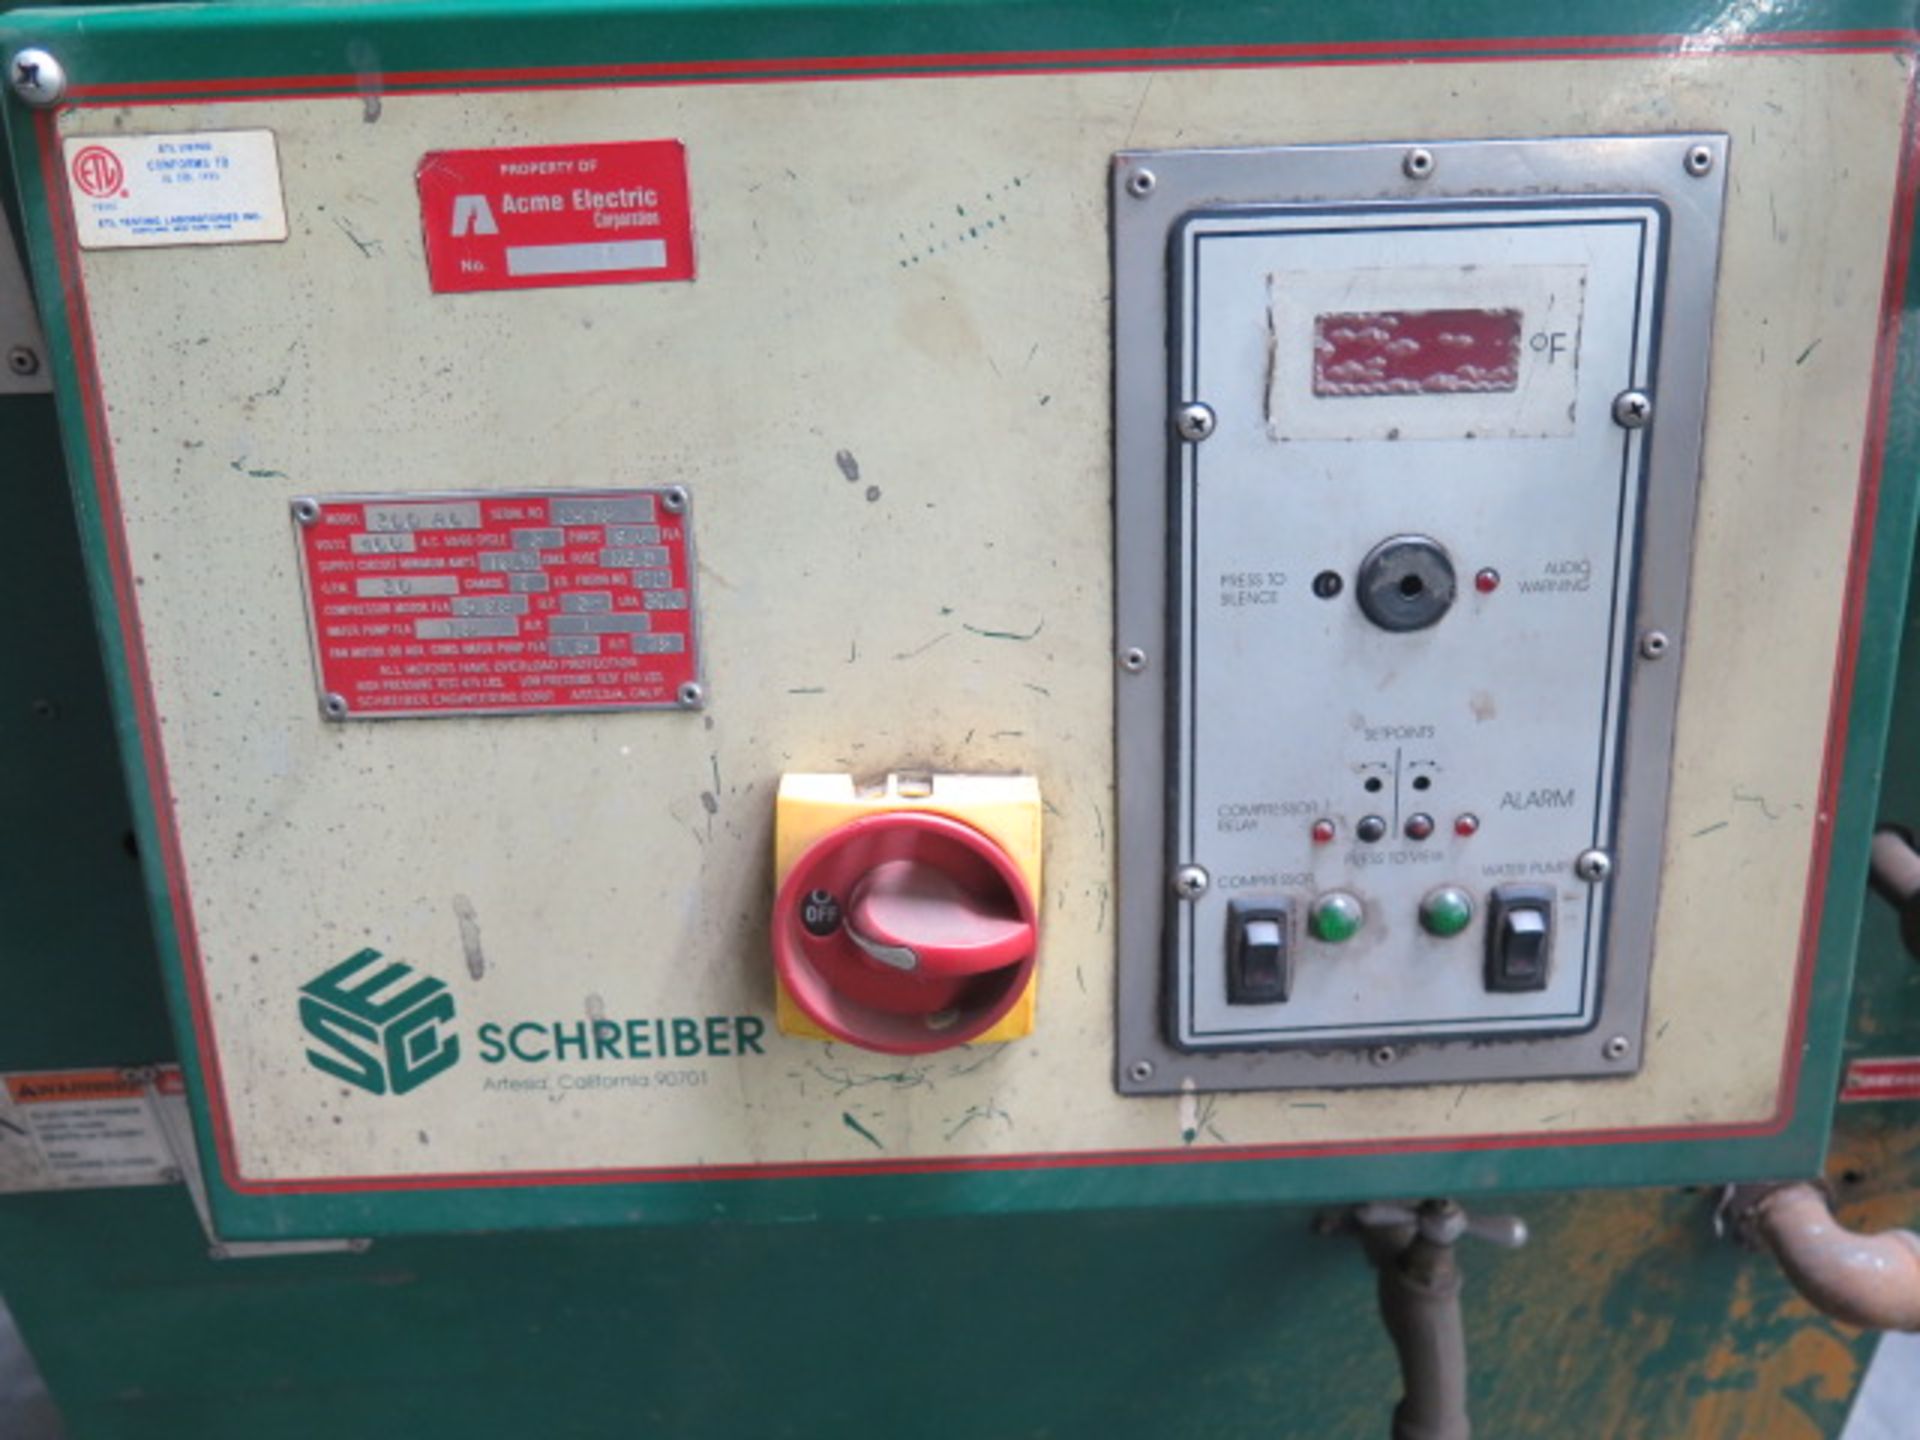 Schreiber mdl. 300AC Process Chiller s/n 2415 - Image 3 of 3